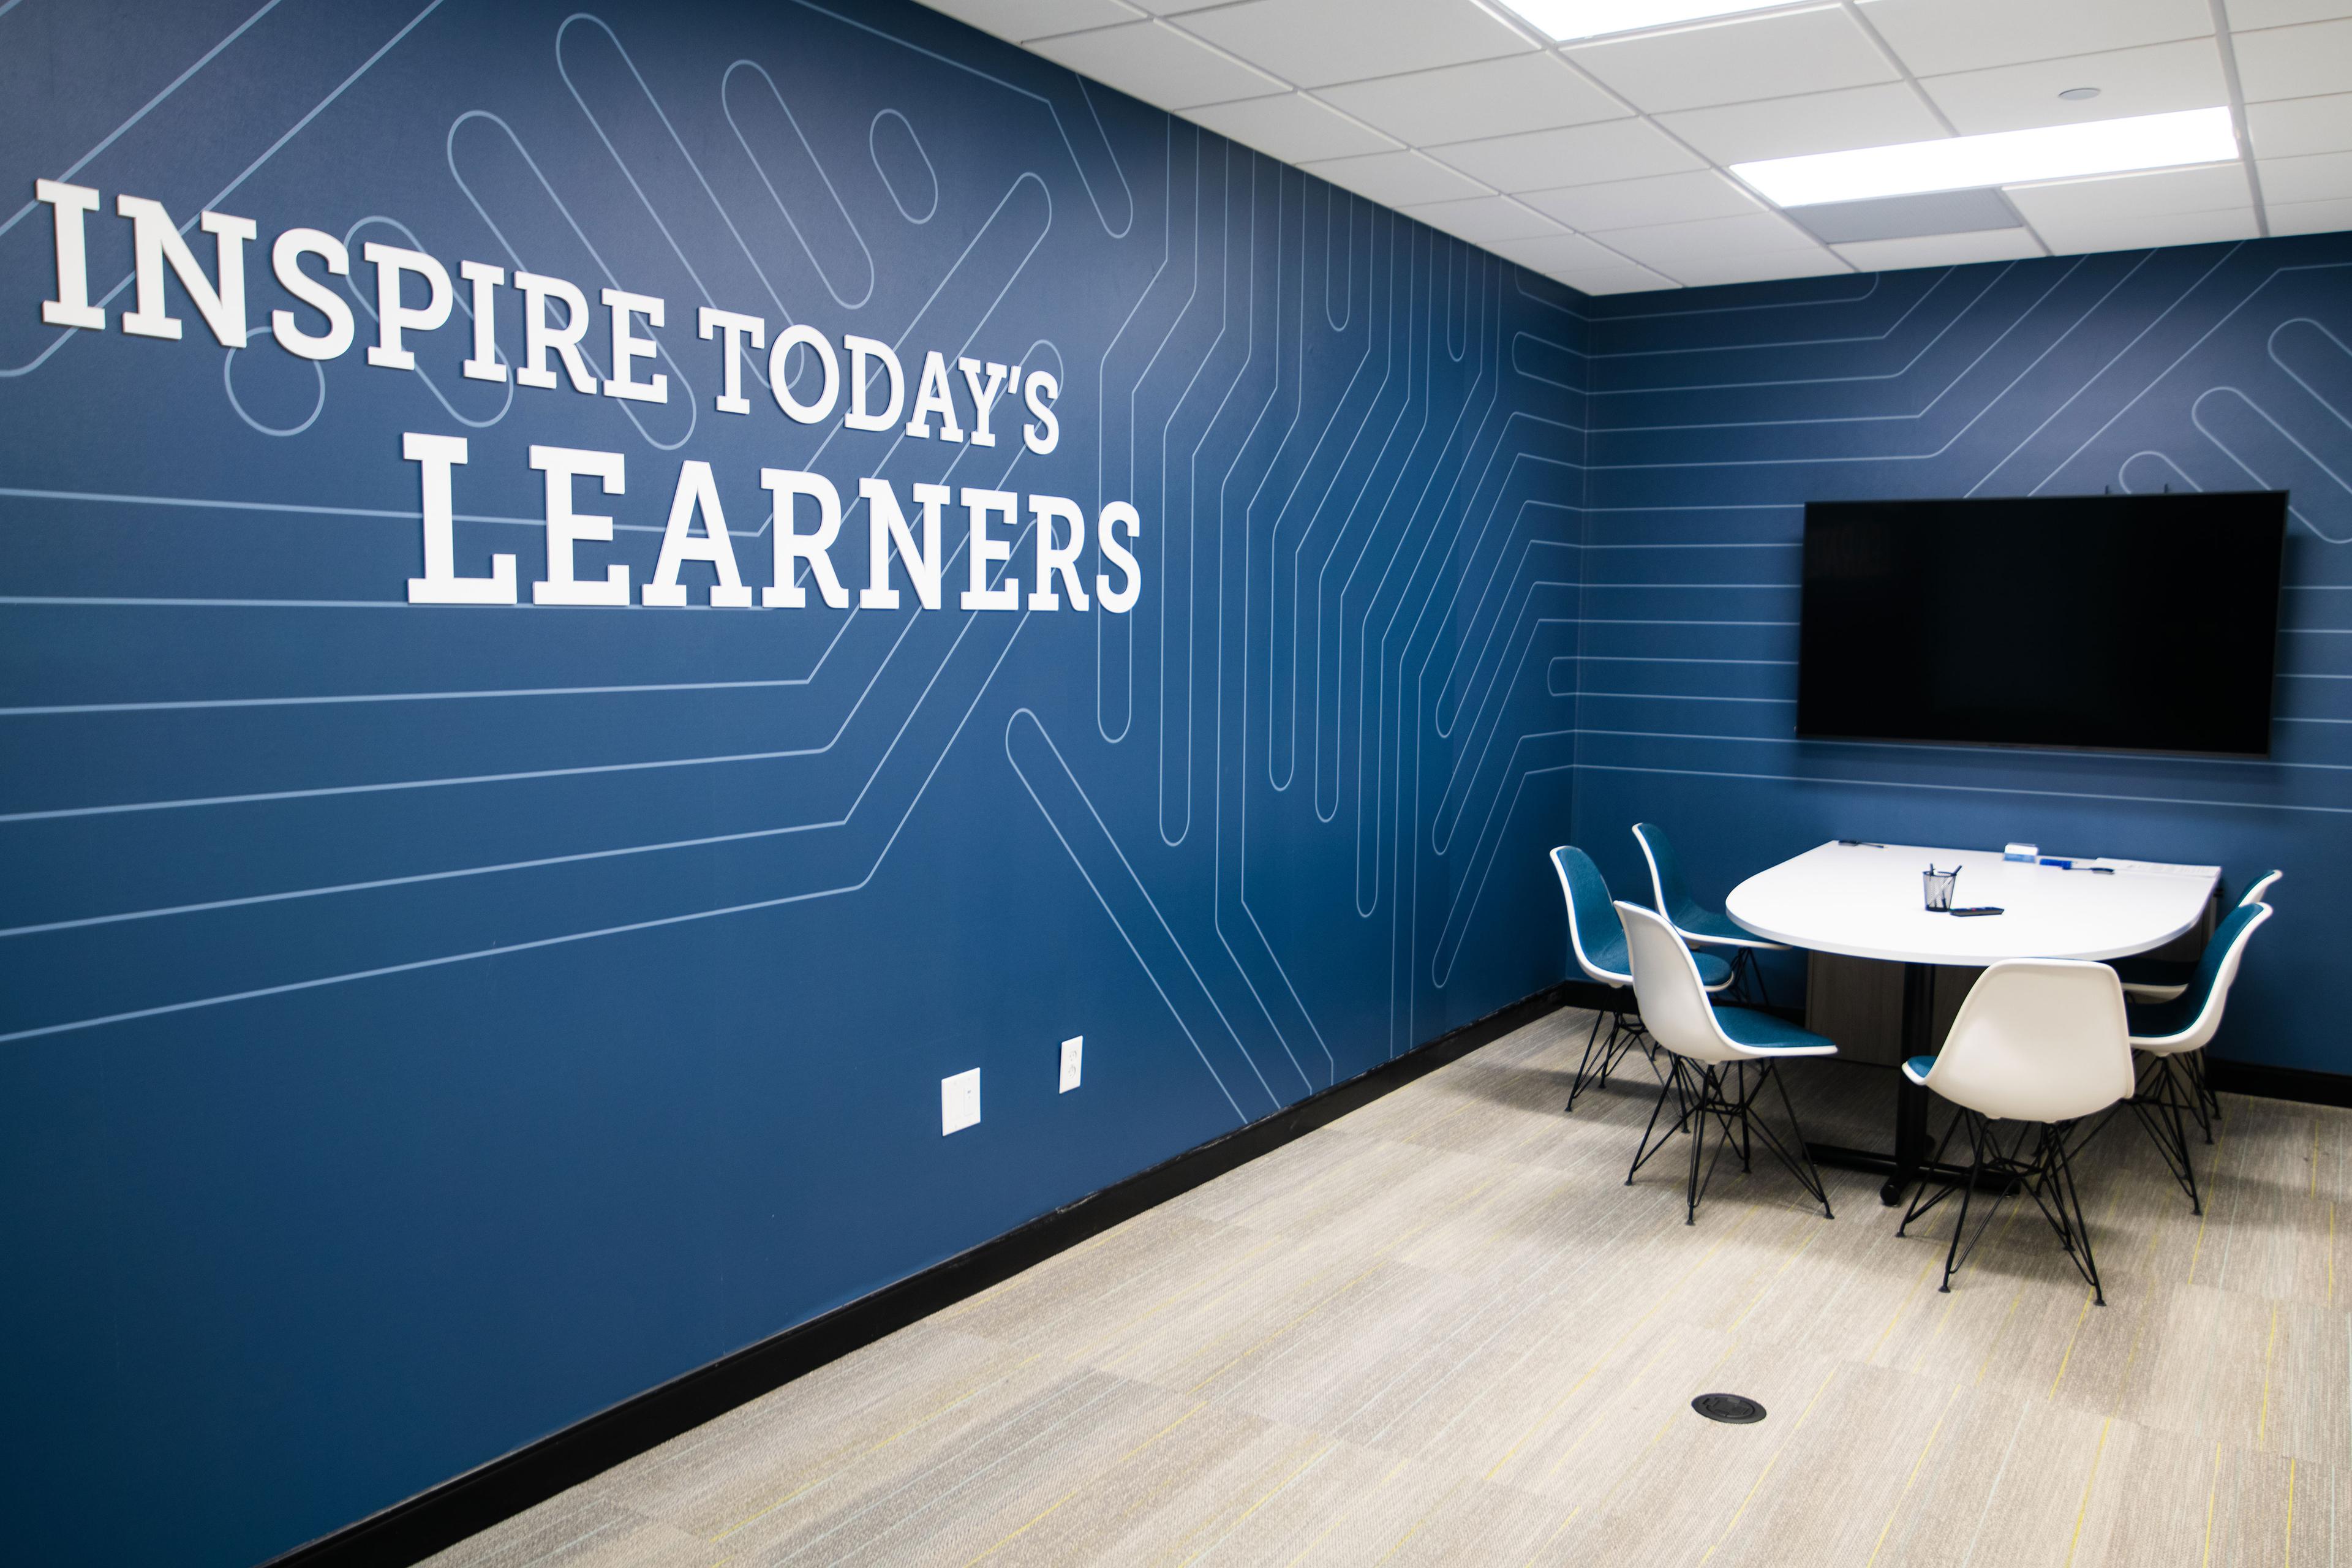 Conference room with the words Inspire Today's Learners on the wall